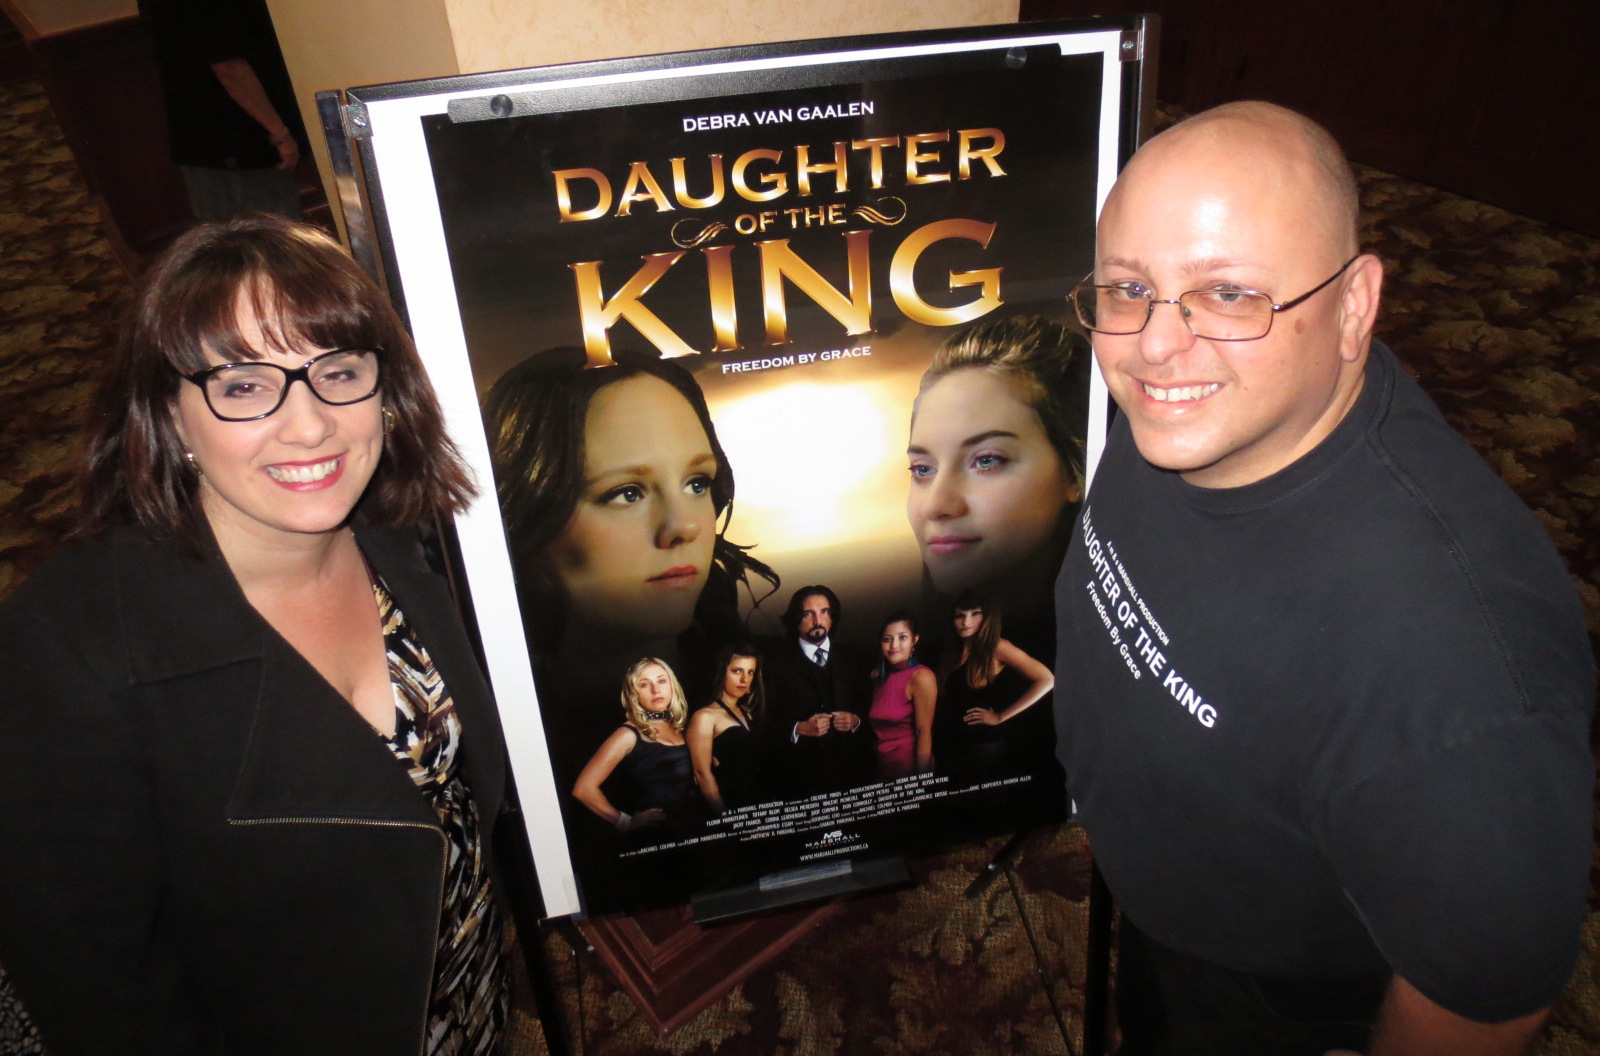 Angela Corso, program manager, Chatham-Kent Women's Centre, and Daughter of the KIng film director Matthew Marshall presented 